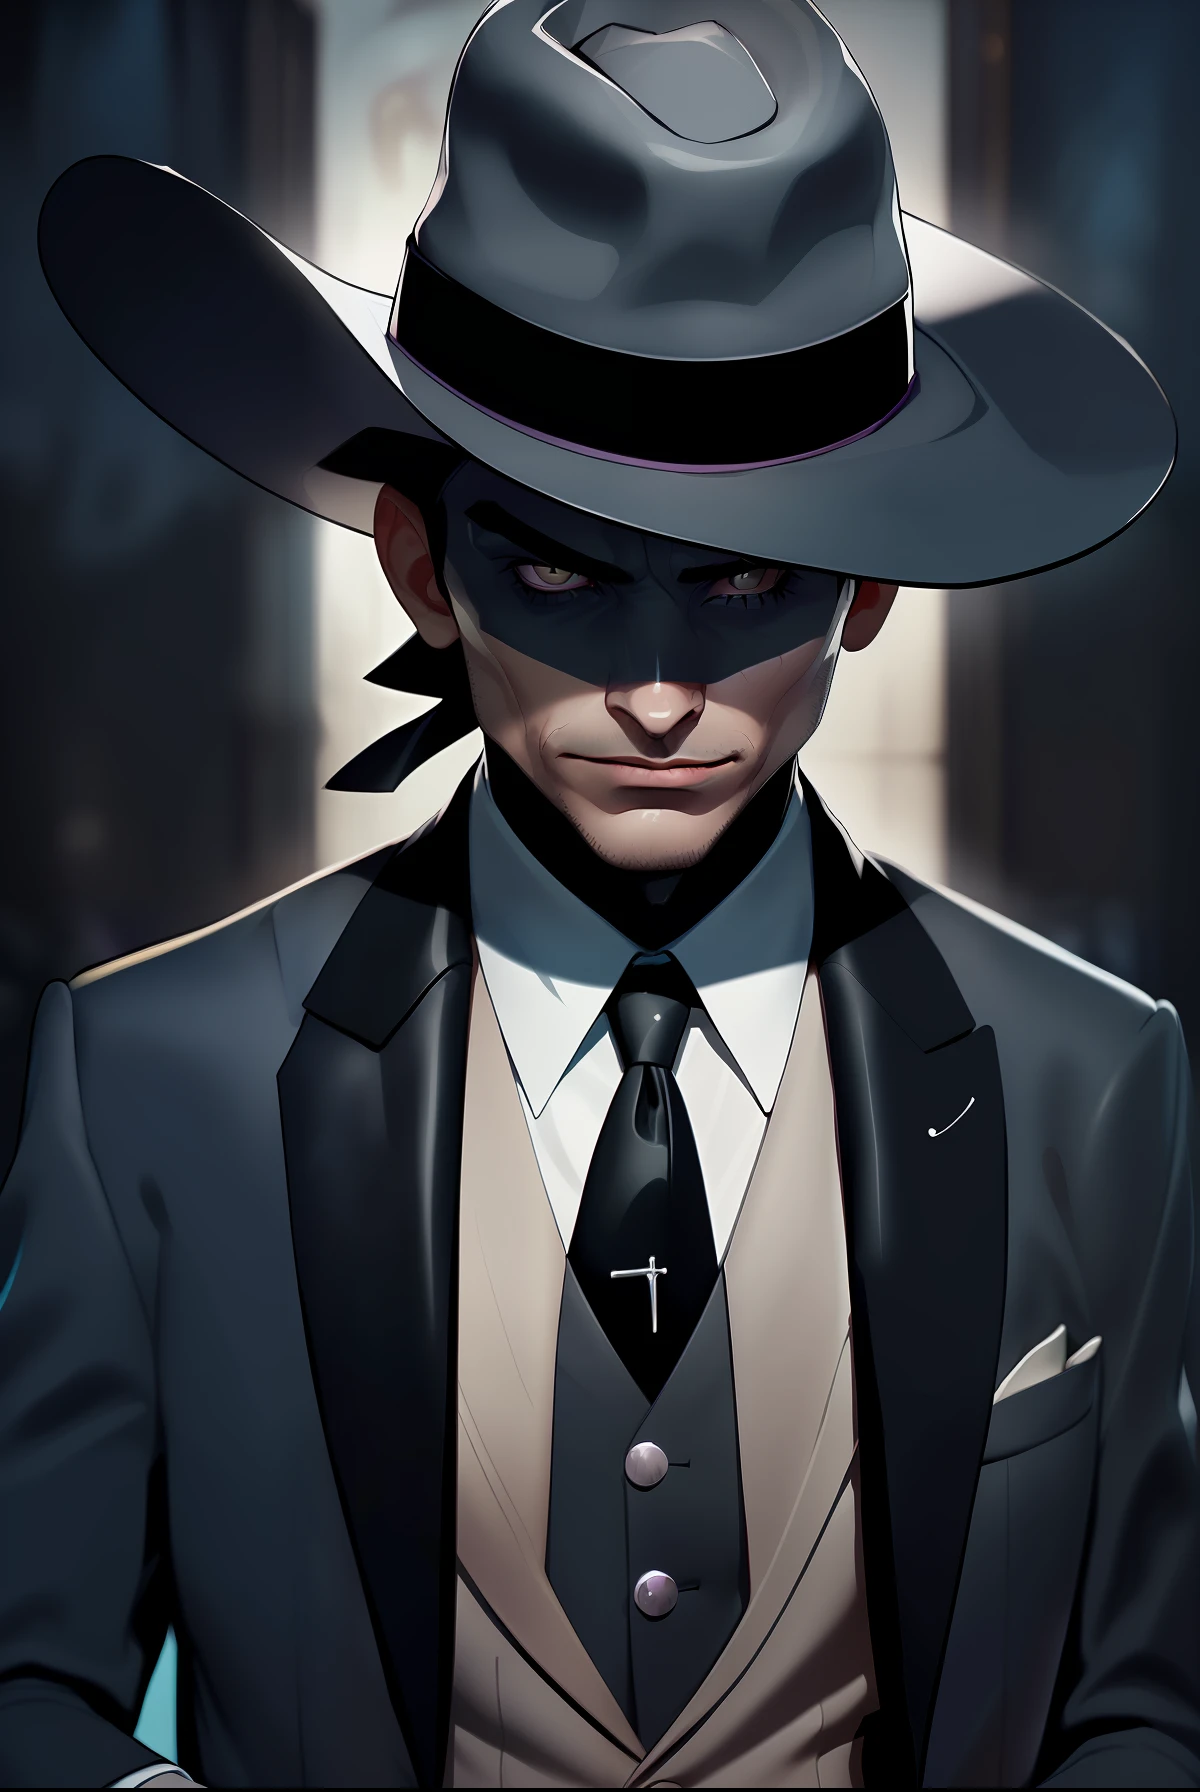 Image of a man in suit and tie with hat, noir detective, a suited man in a hat, promo image, handsome man, Editorial Photography, for gq, Very beauthful, Face pretty, ridiculously handsome, fedora, epic portrait of menacing, extremely pretty, sharp looking portrait